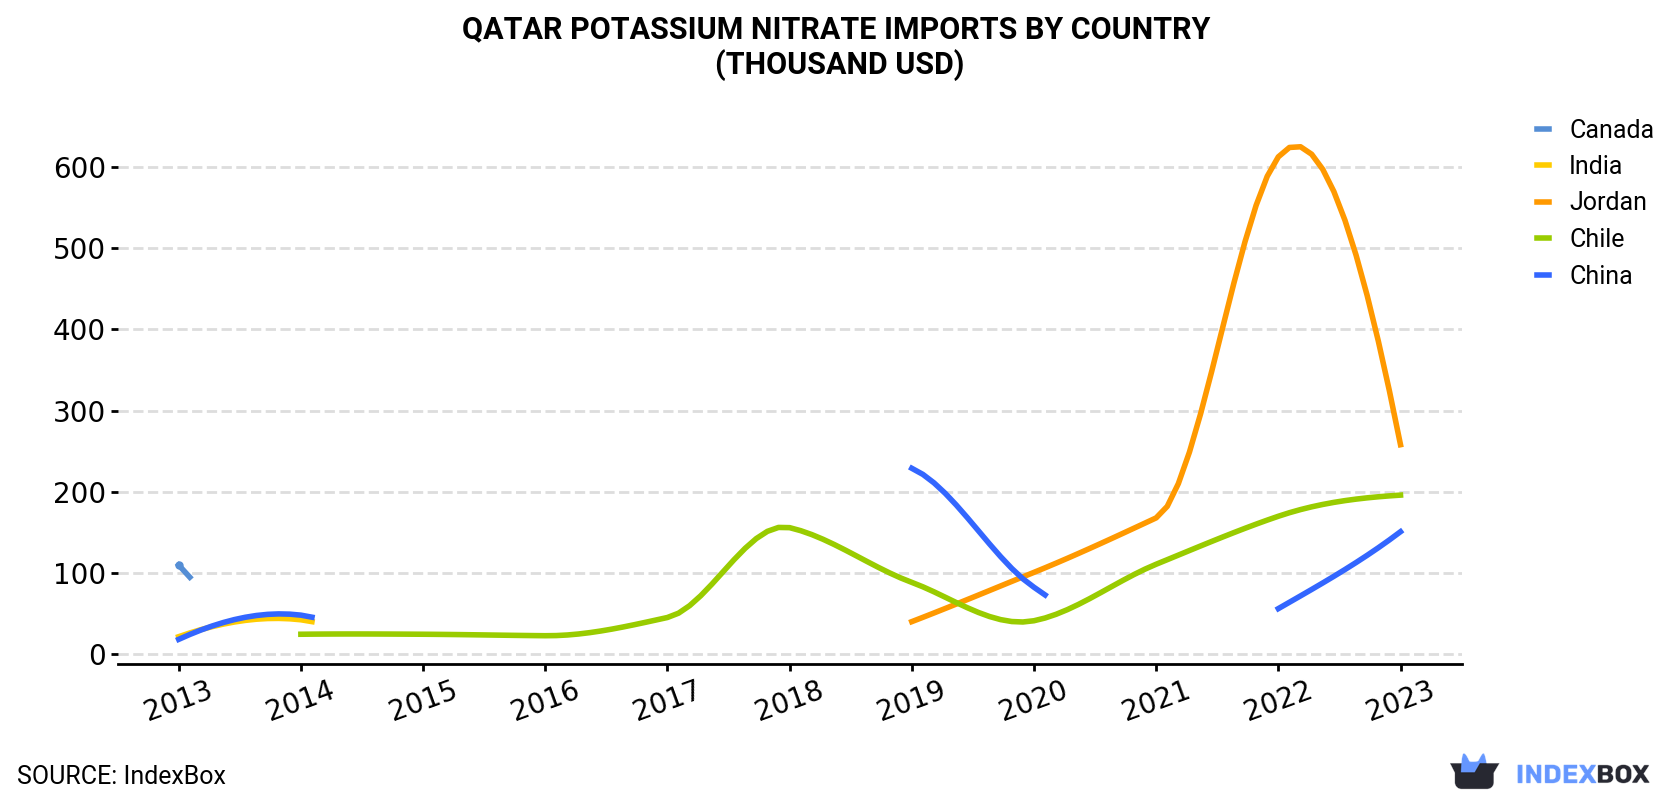 Qatar Potassium Nitrate Imports By Country (Thousand USD)